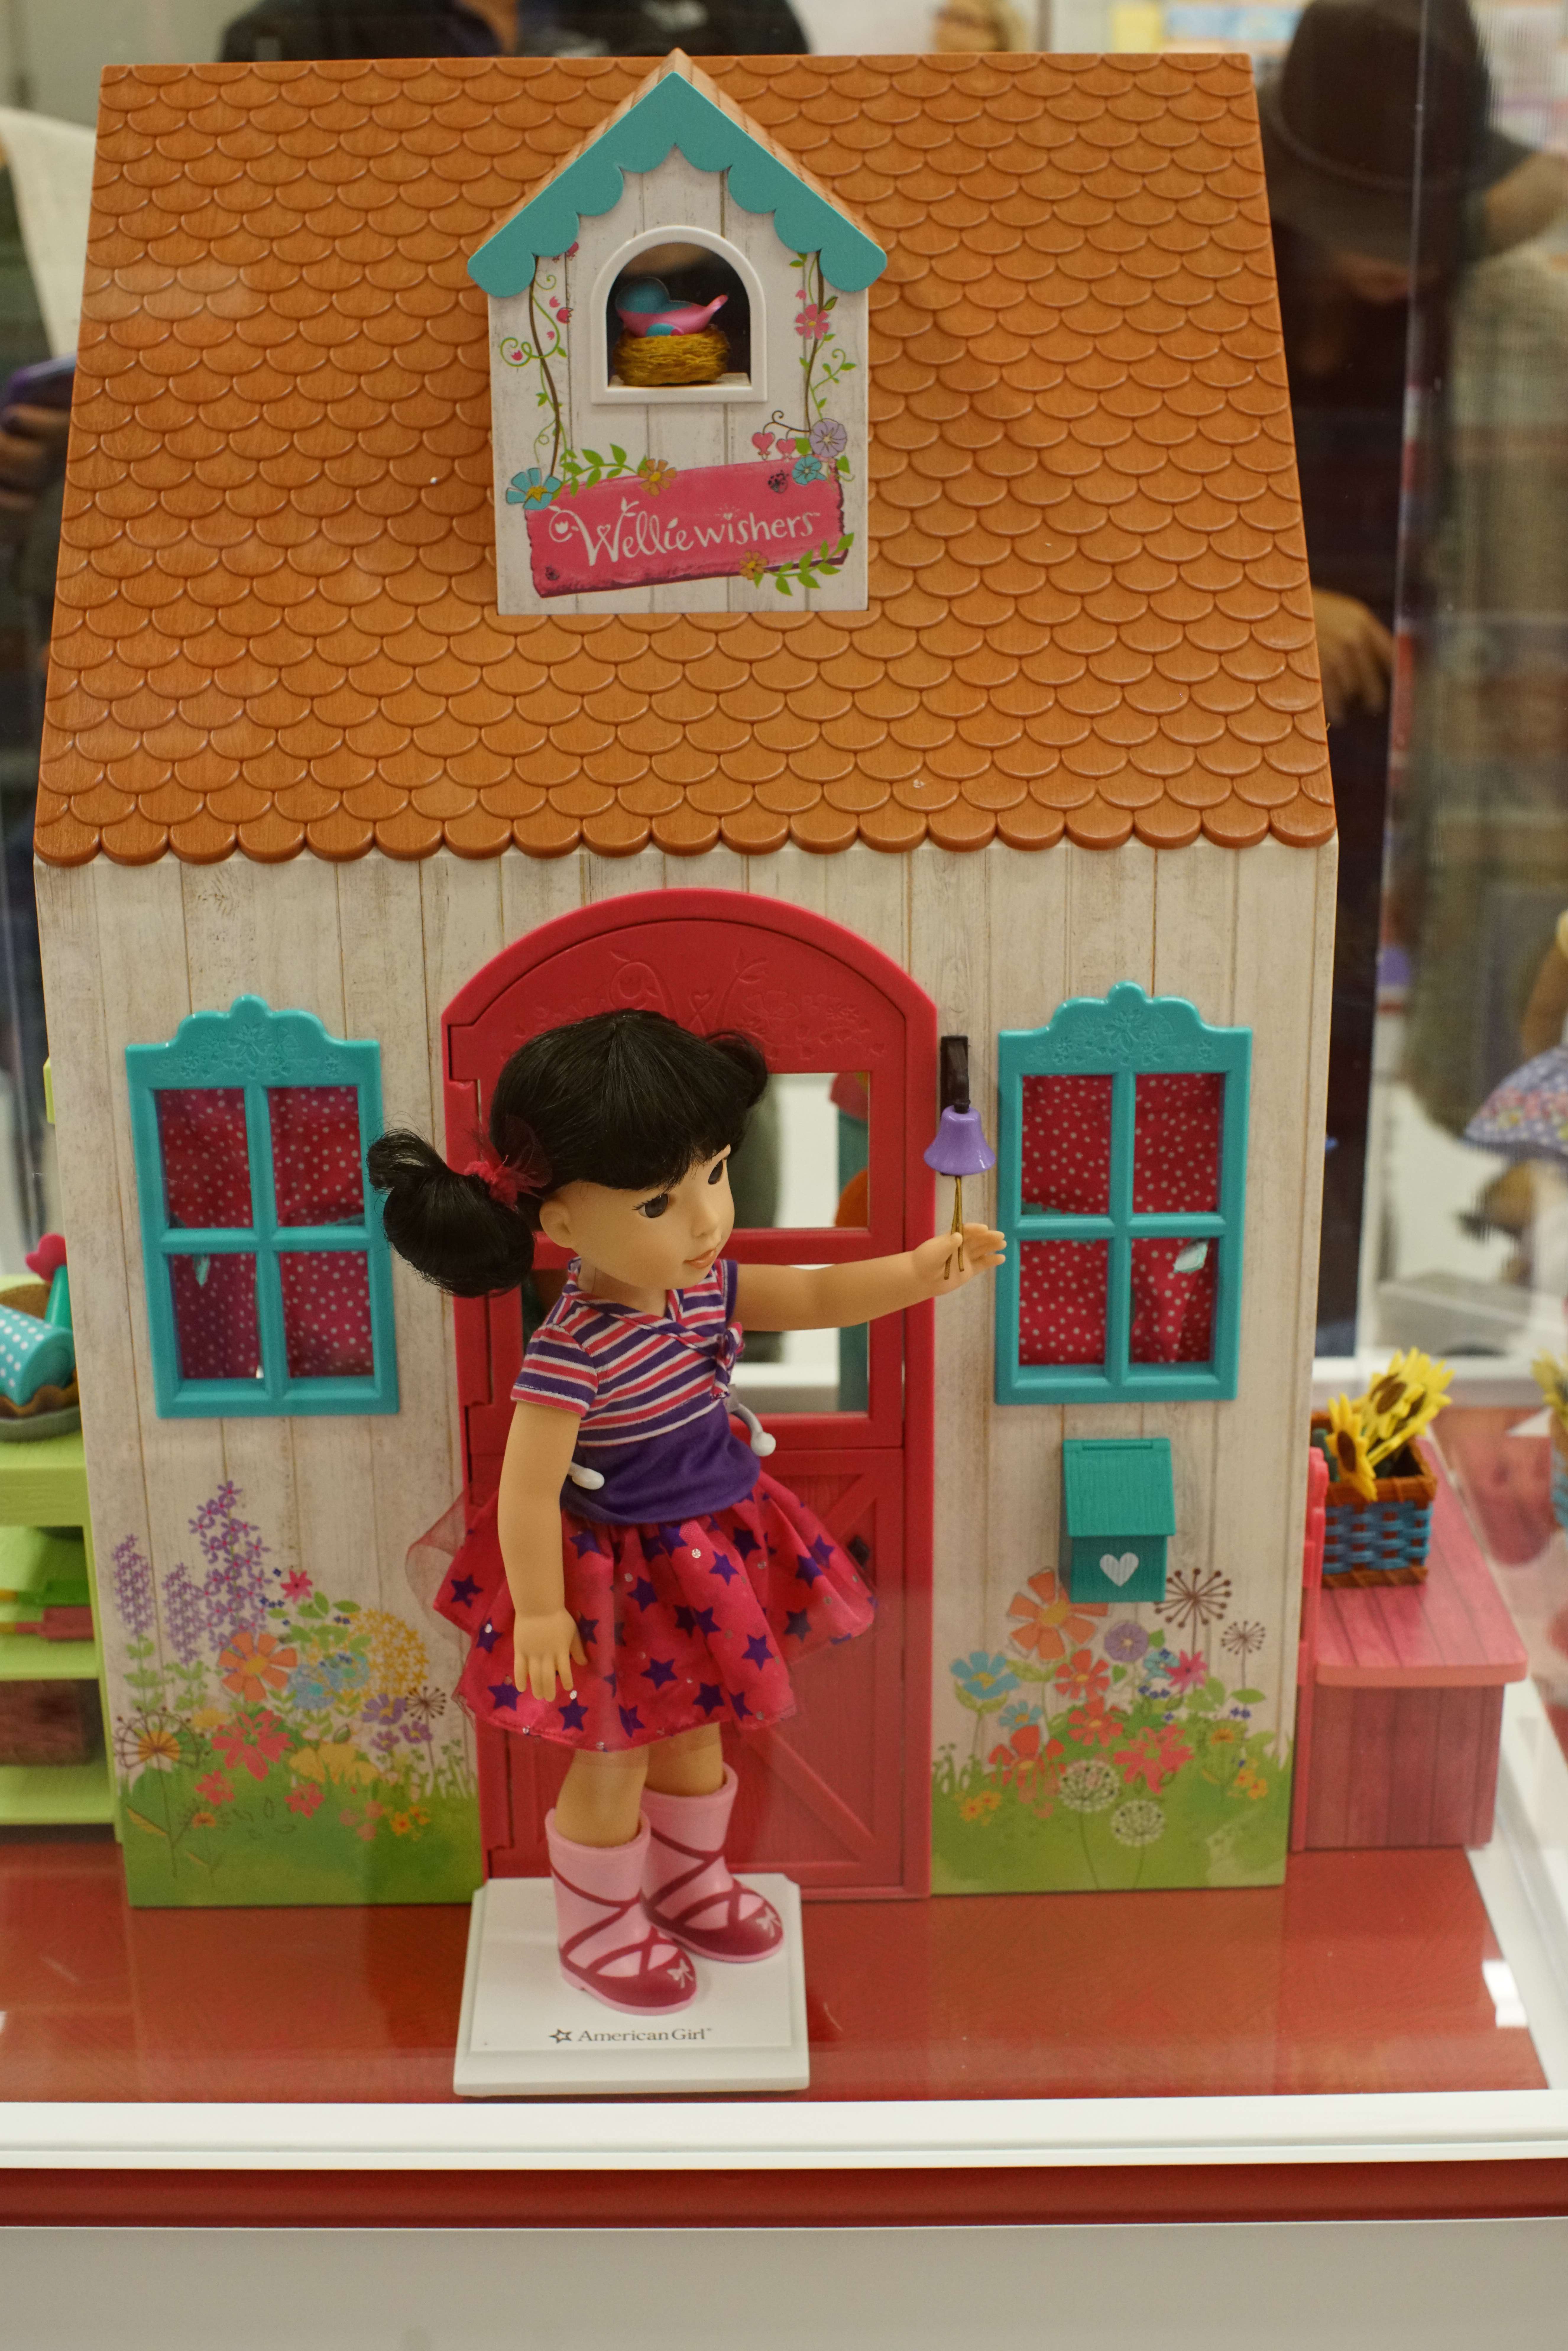 American Girl Shop Grand Openings at Toys "R" Us